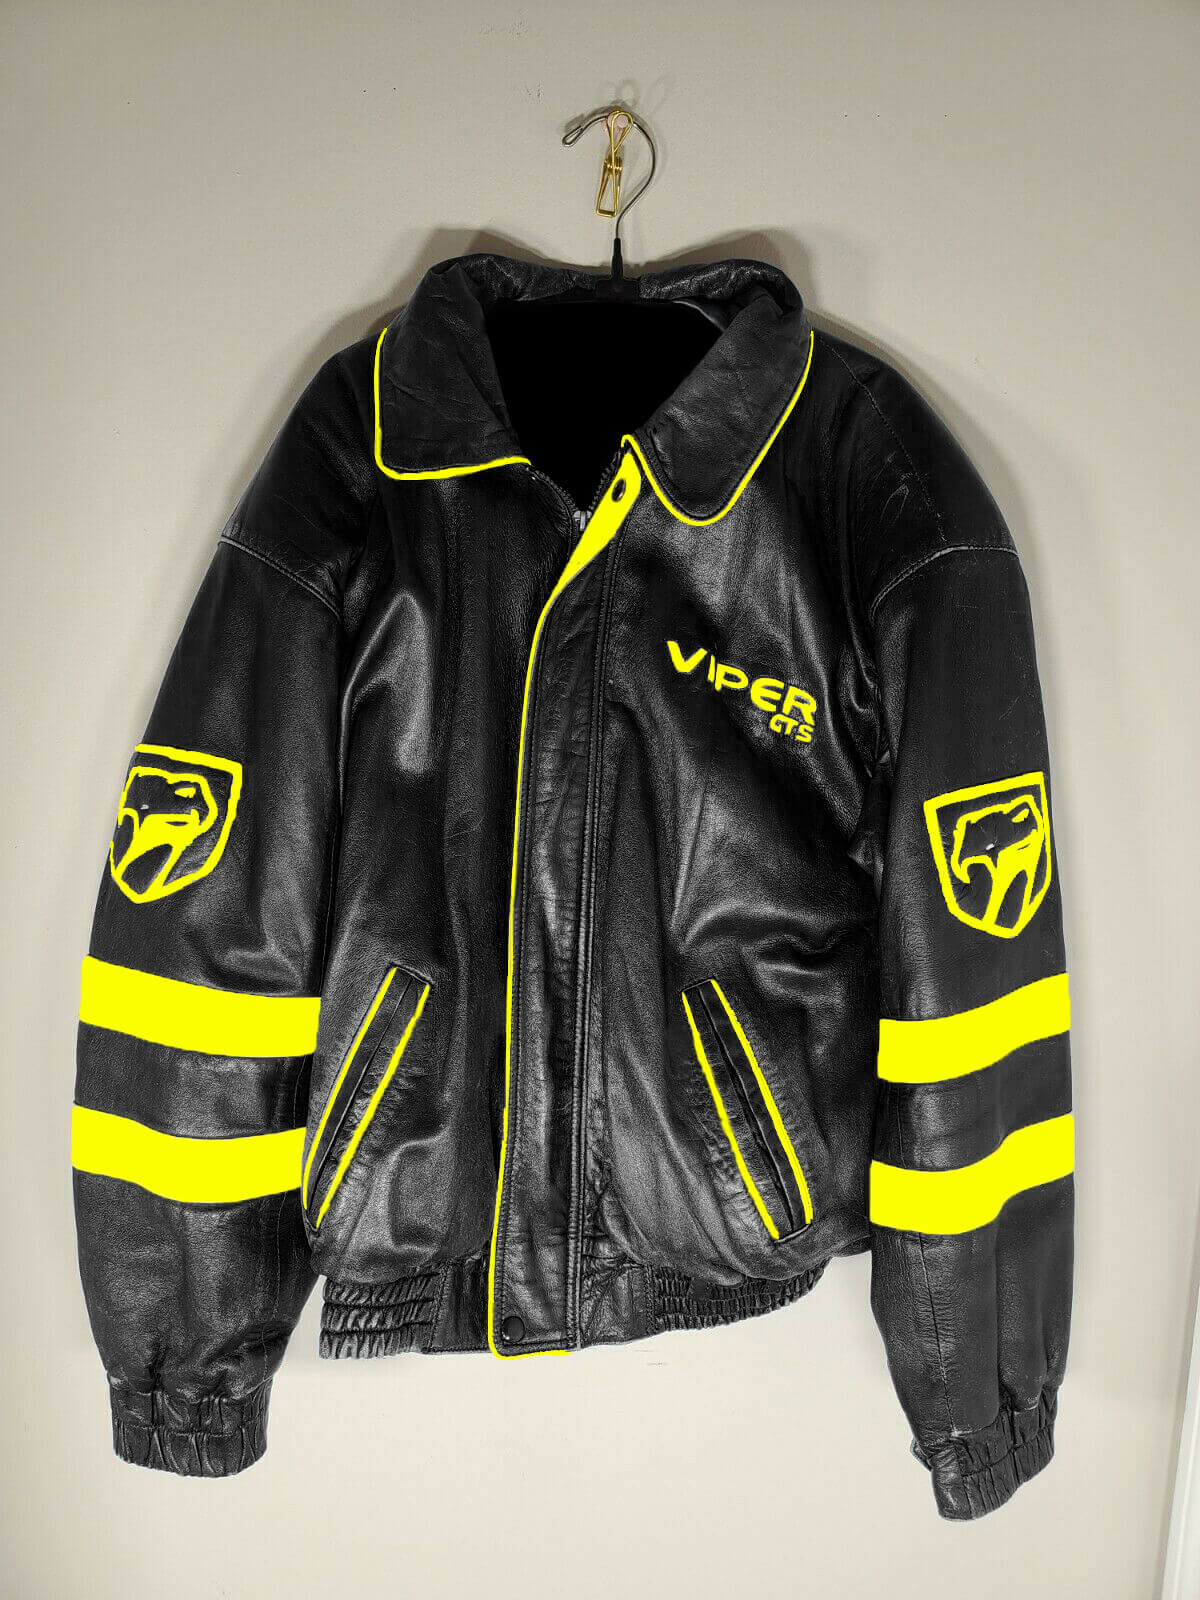 Dodge Viper Black And Yellow Leather Jacket - Maker of Jacket